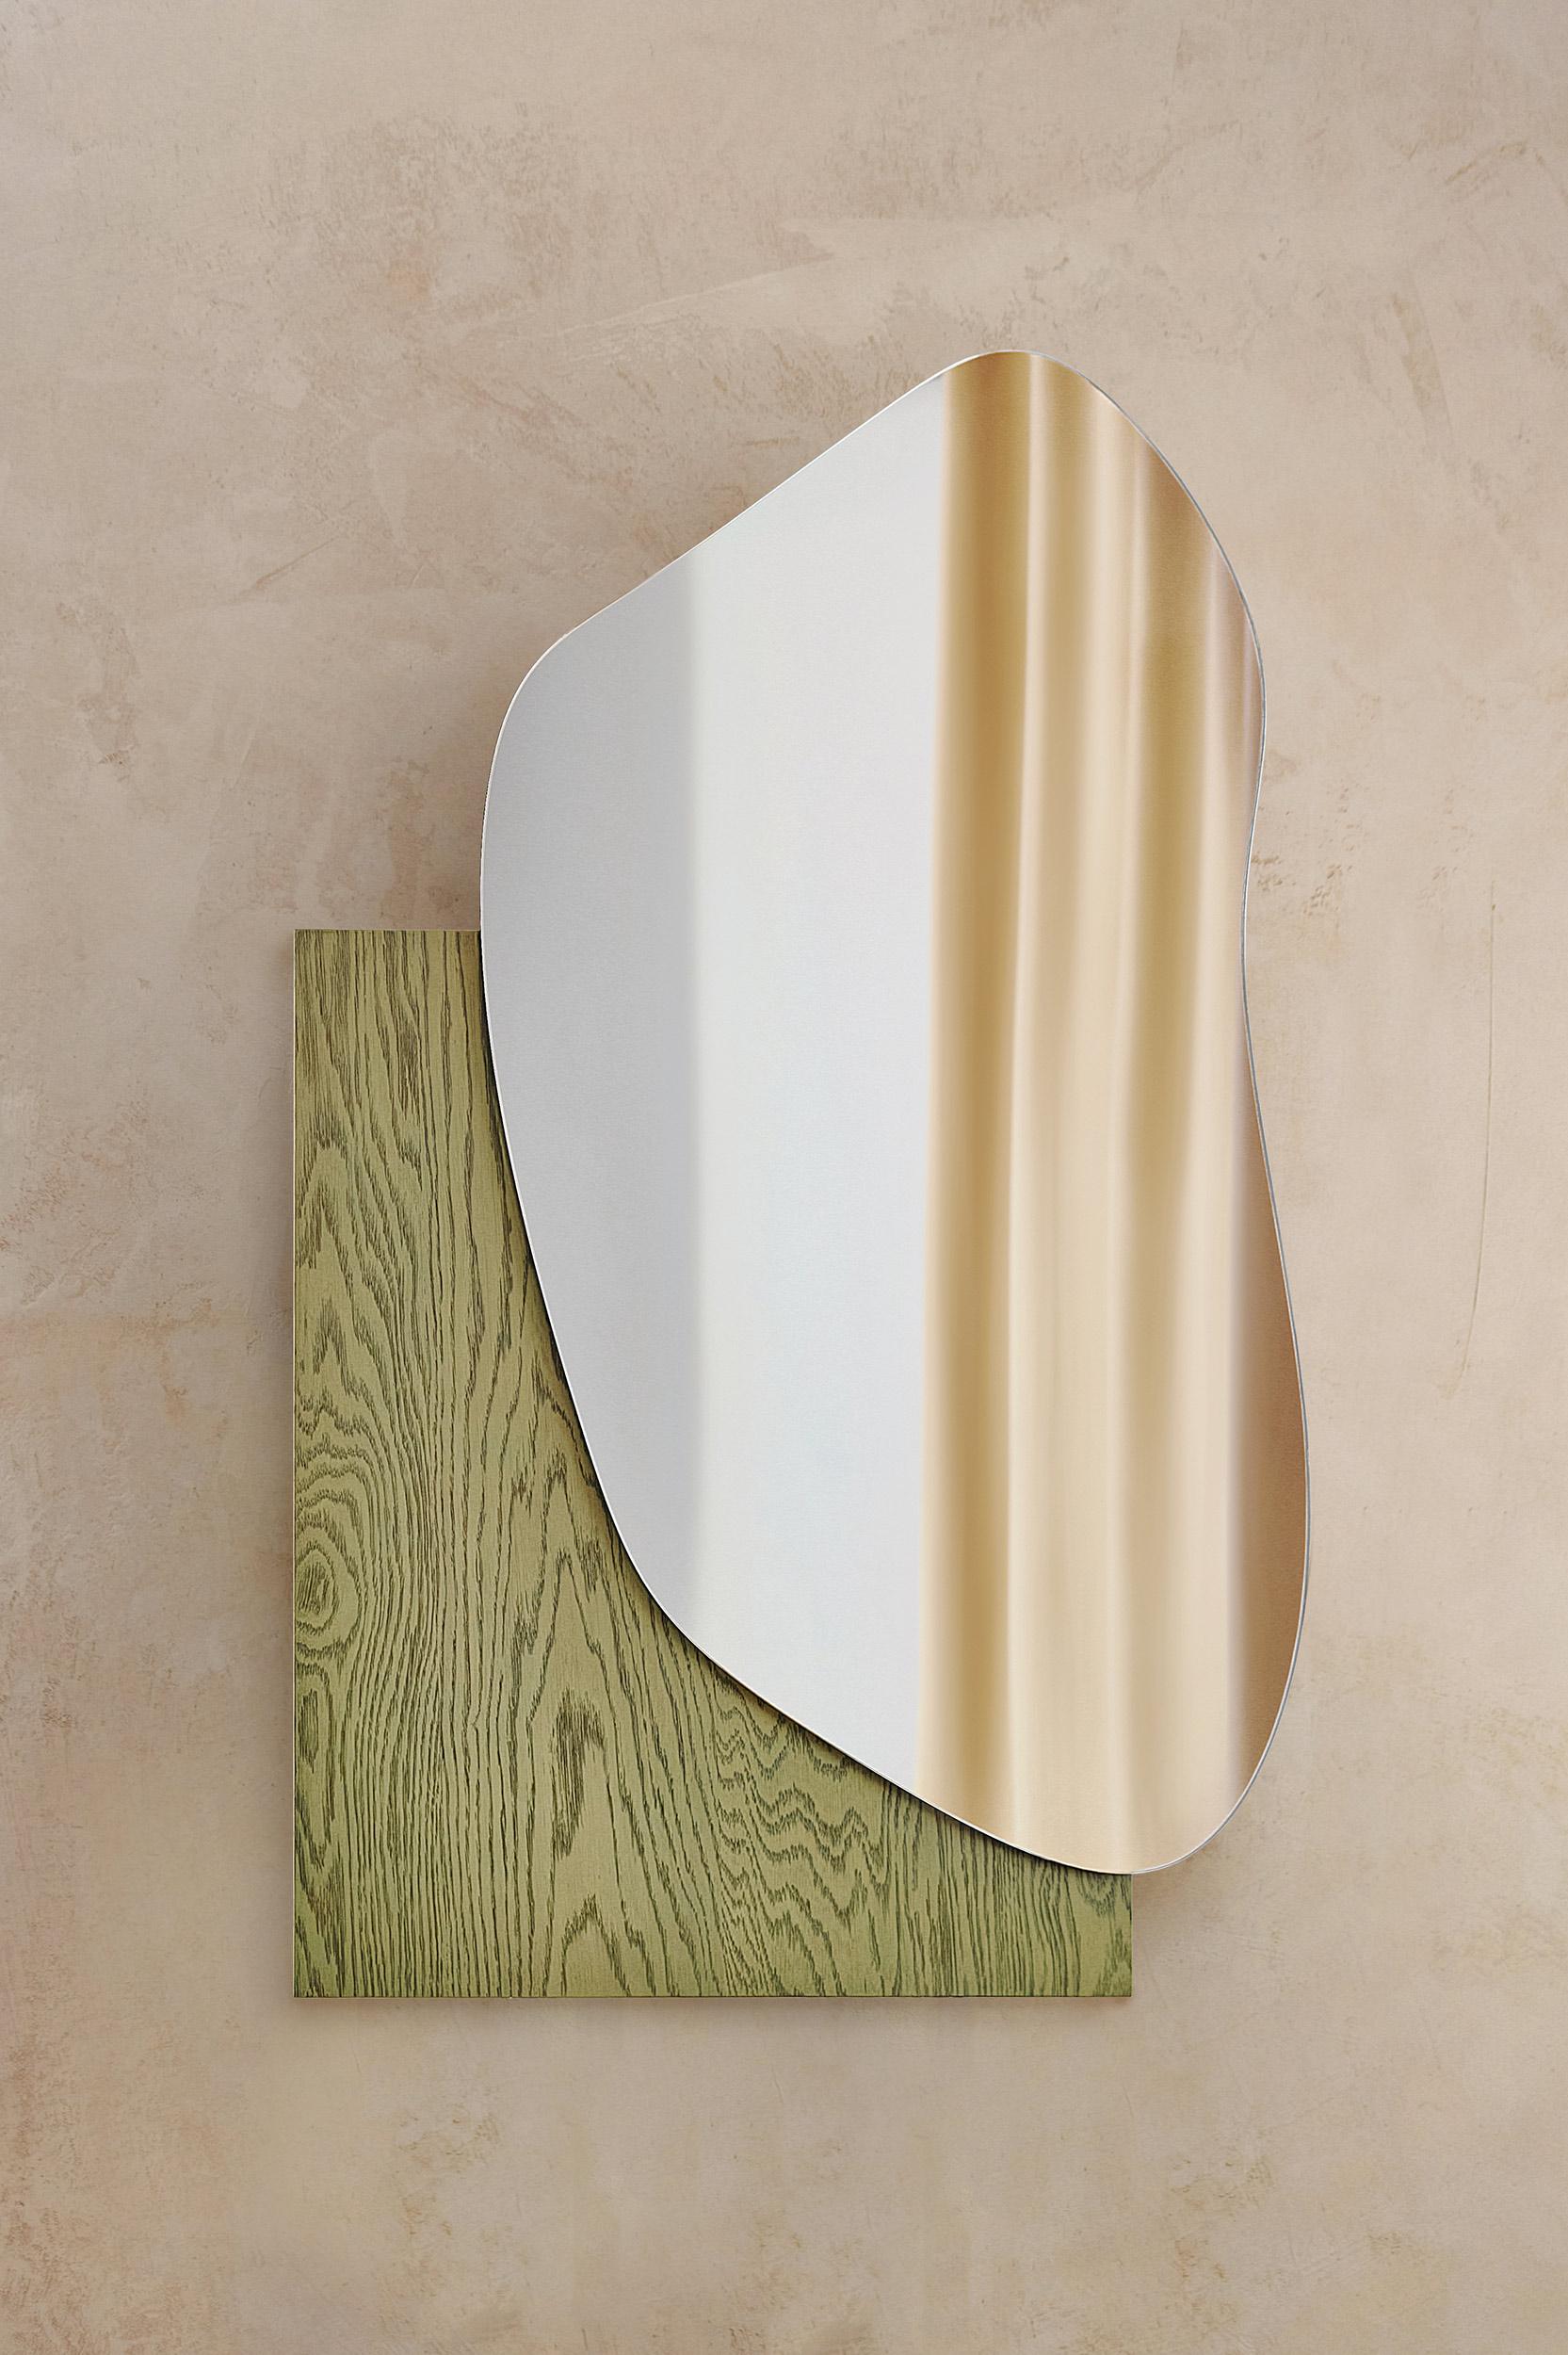 Organic Modern Contemporary Wall Mirror 'Lake 1' by Noom, Blue veneered wood  For Sale